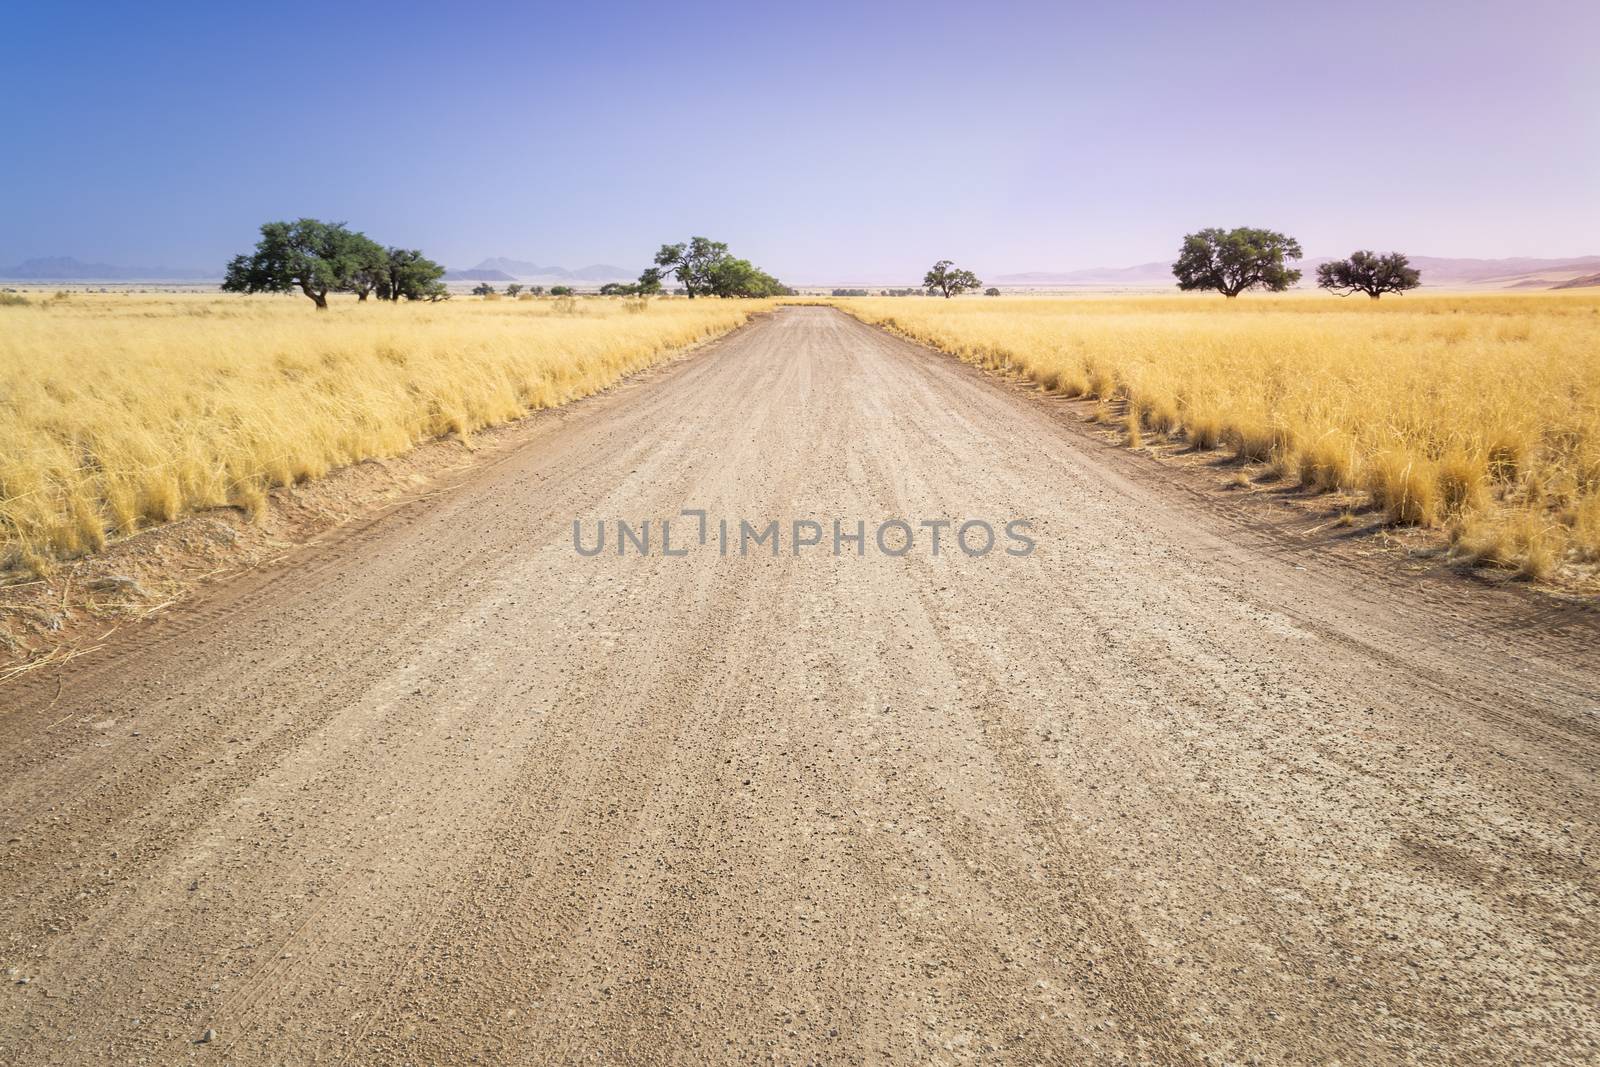 Grass-lined Namibian savanna gravel road near Sossusvlei, Namibia, during travel and self drive road trip in Africa. Showing horizon, infinity point and dramatic golden hour by kb79